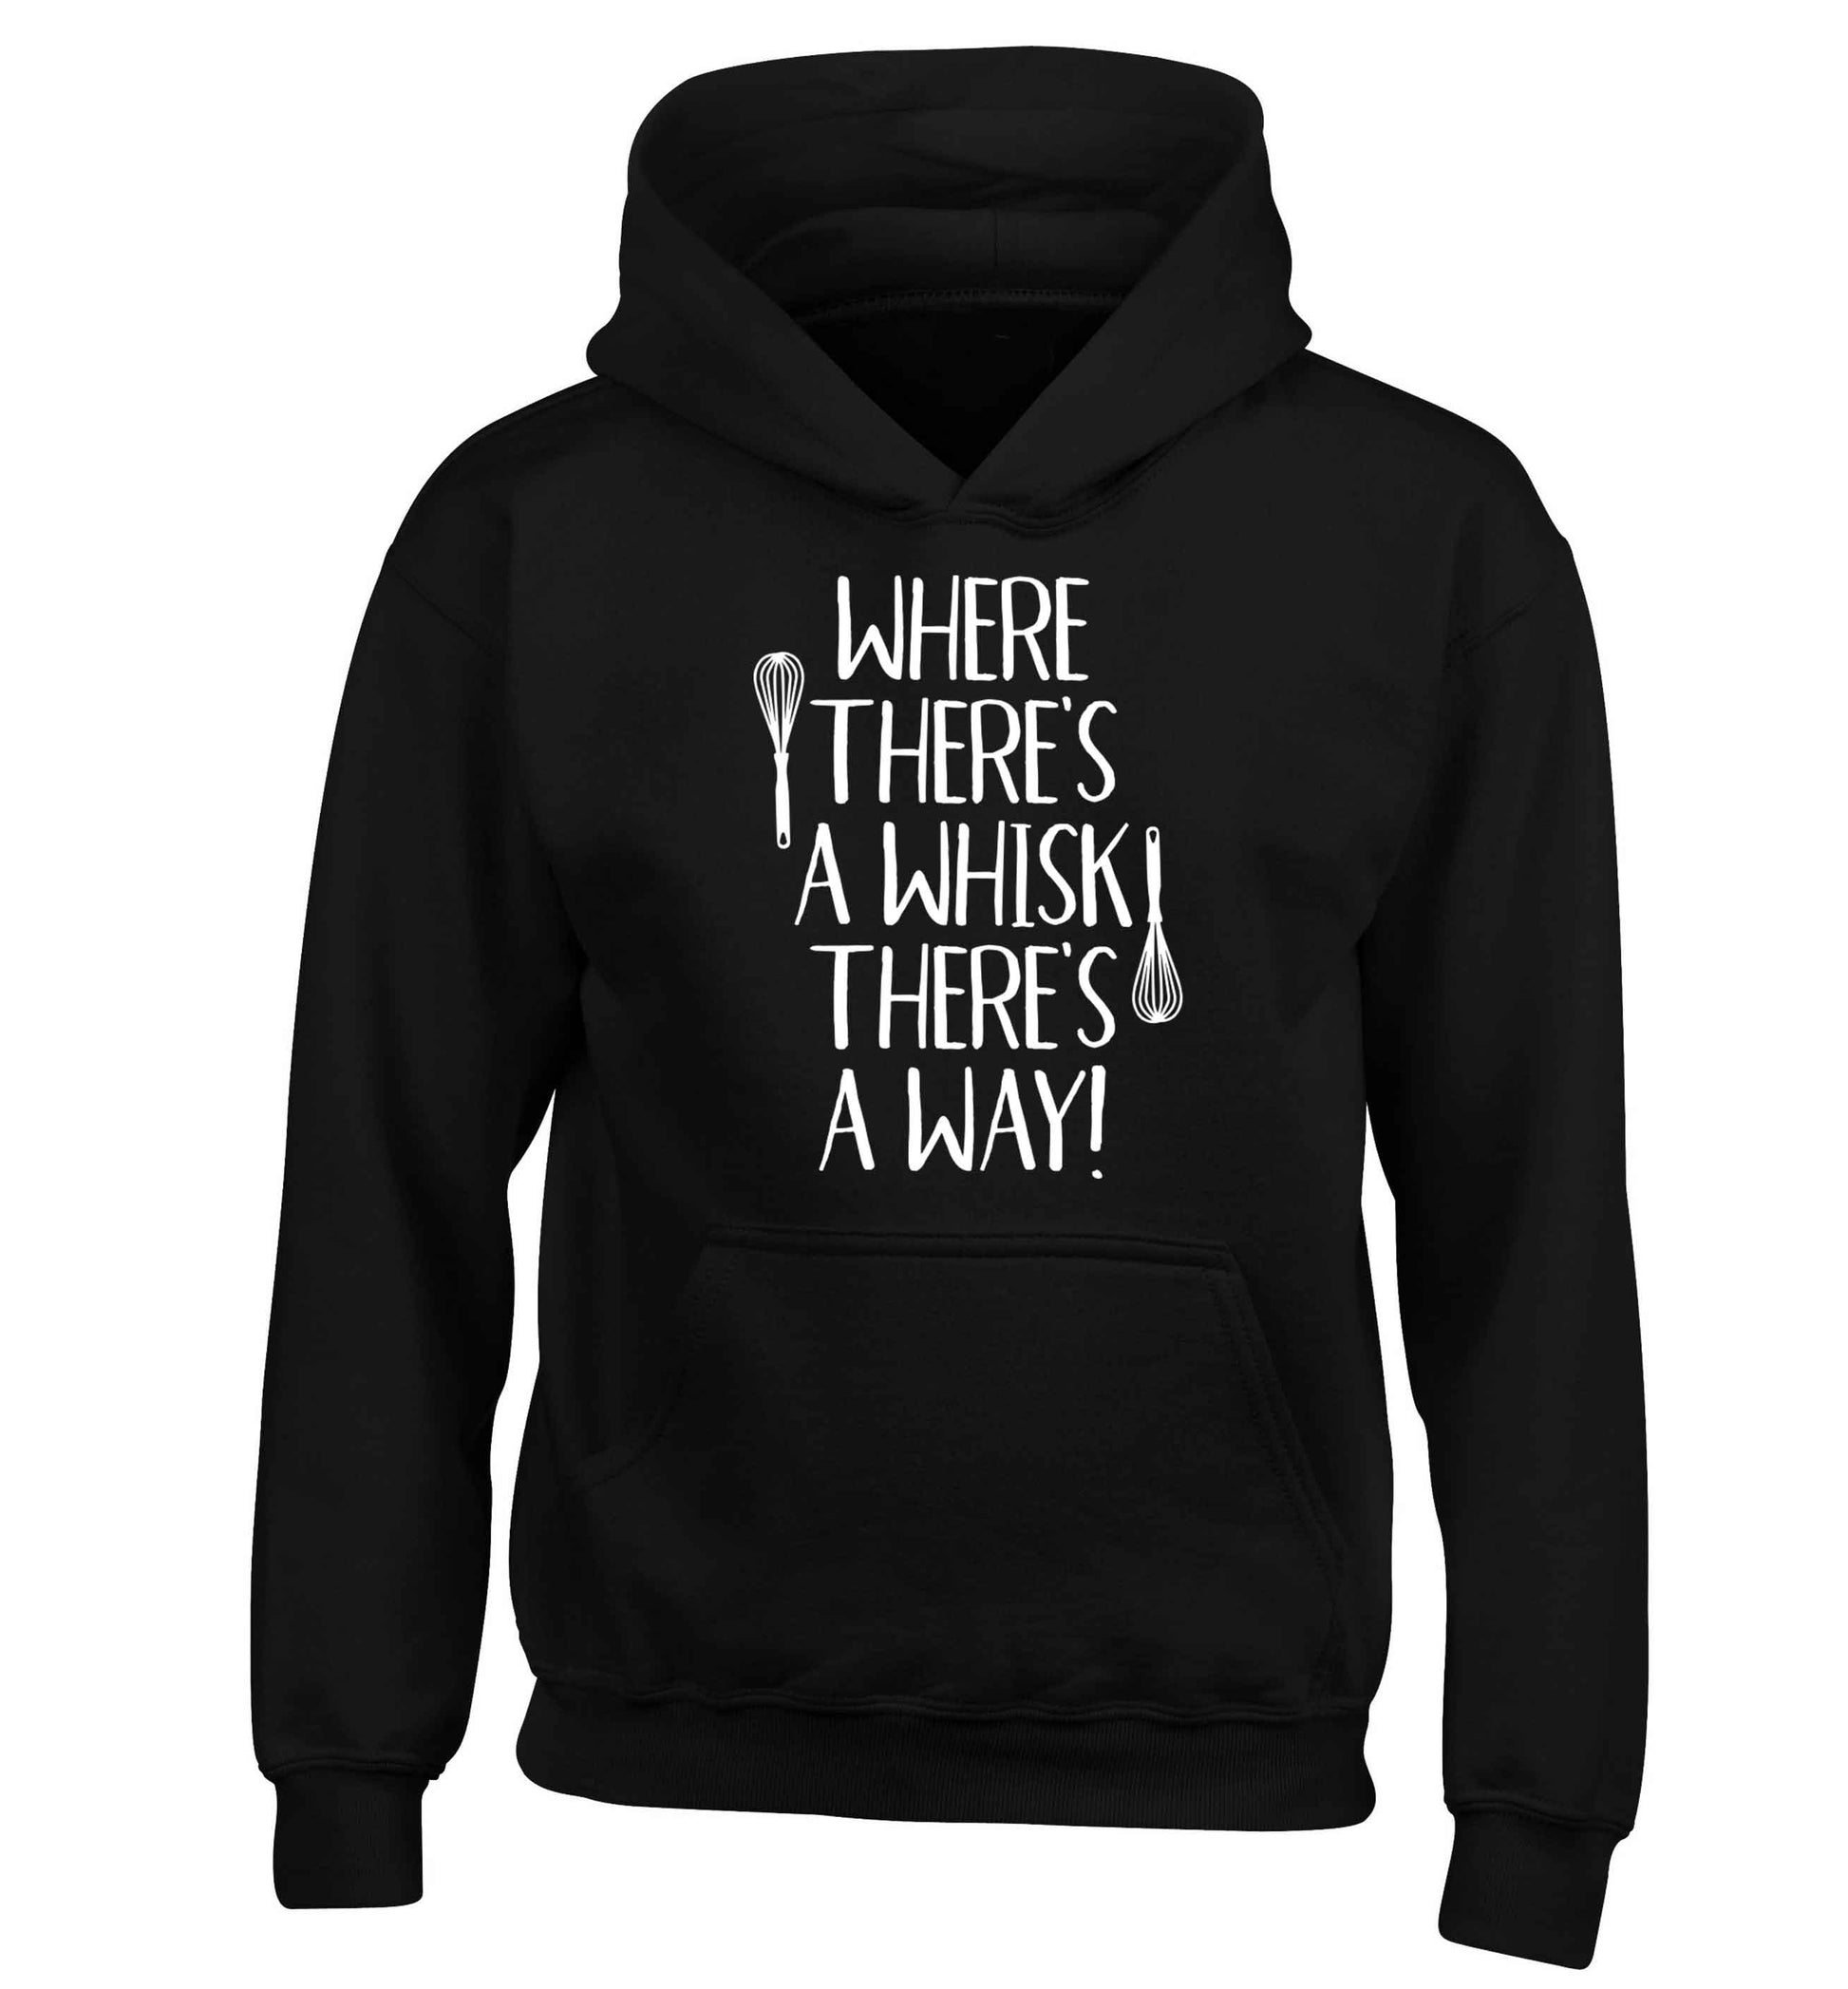 Where there's a whisk there's a way children's black hoodie 12-13 Years